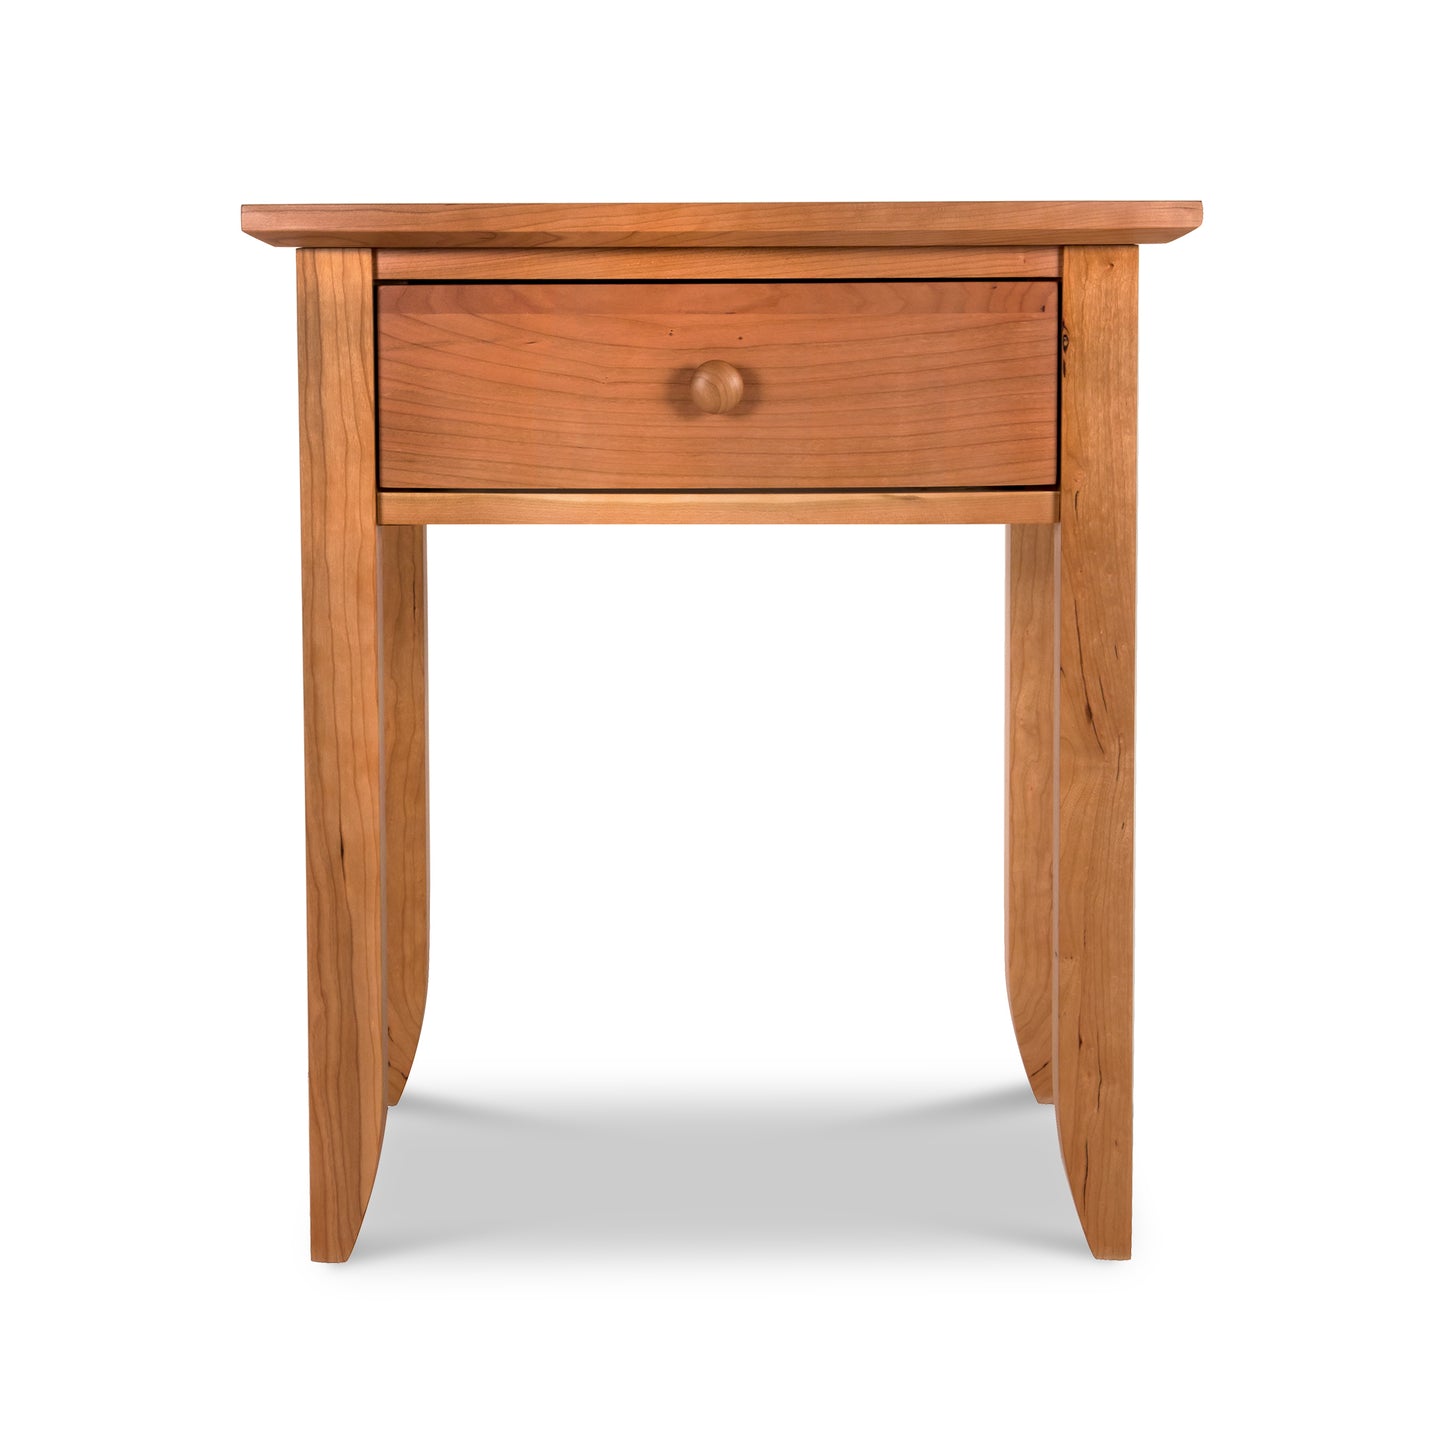 A small wooden Bow Front 1-Drawer Nightstand from Lyndon Furniture with a vintage drawer.